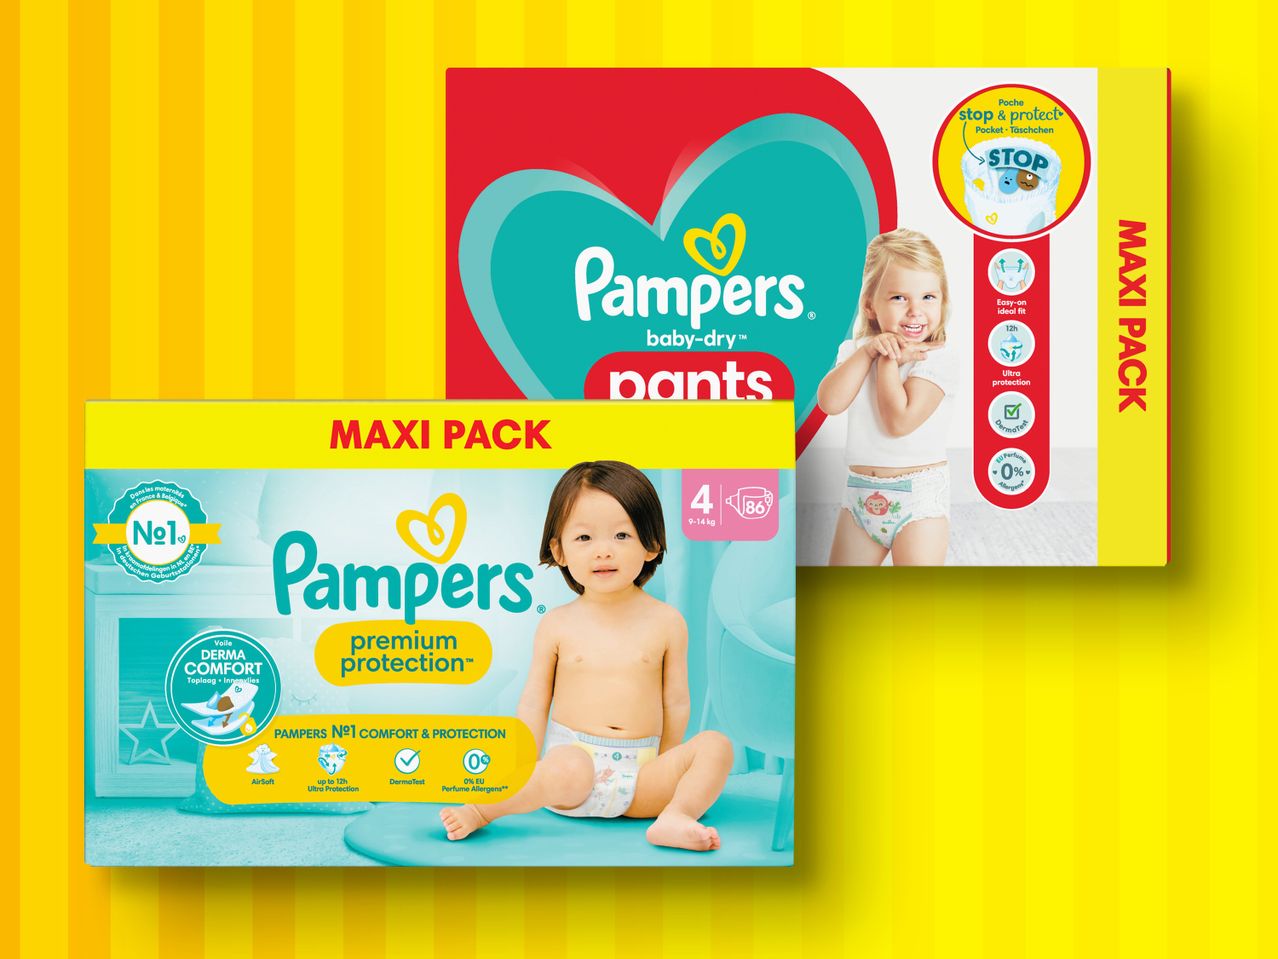 Dry/Pants Pampers Protection/Baby Premium